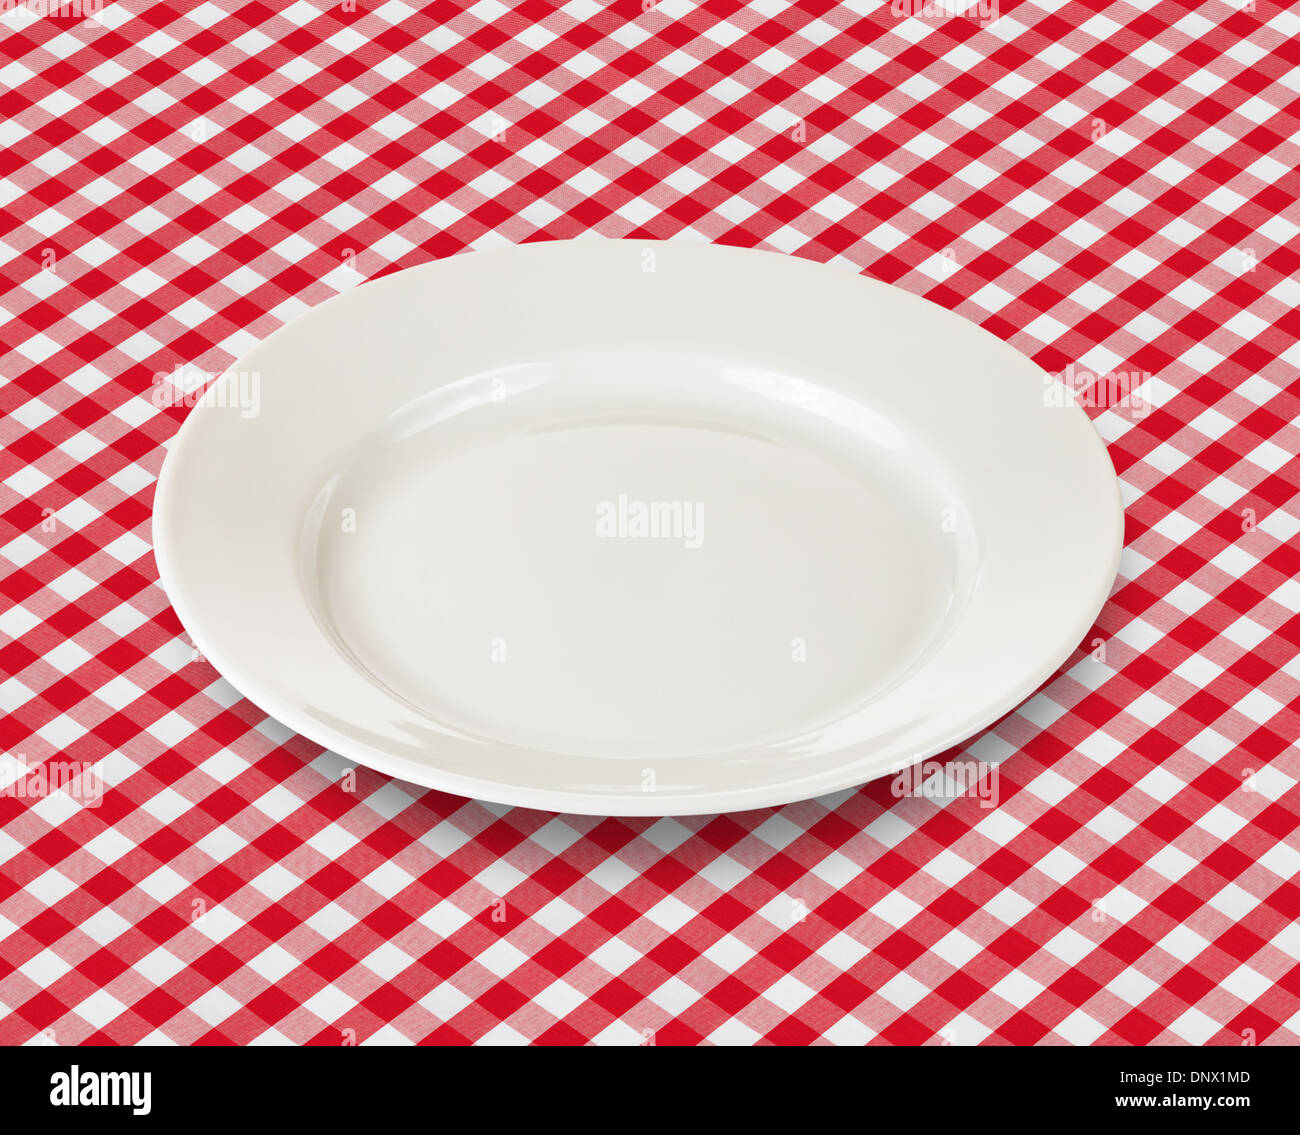 white plate over red checked picnic tablecloth Stock Photo